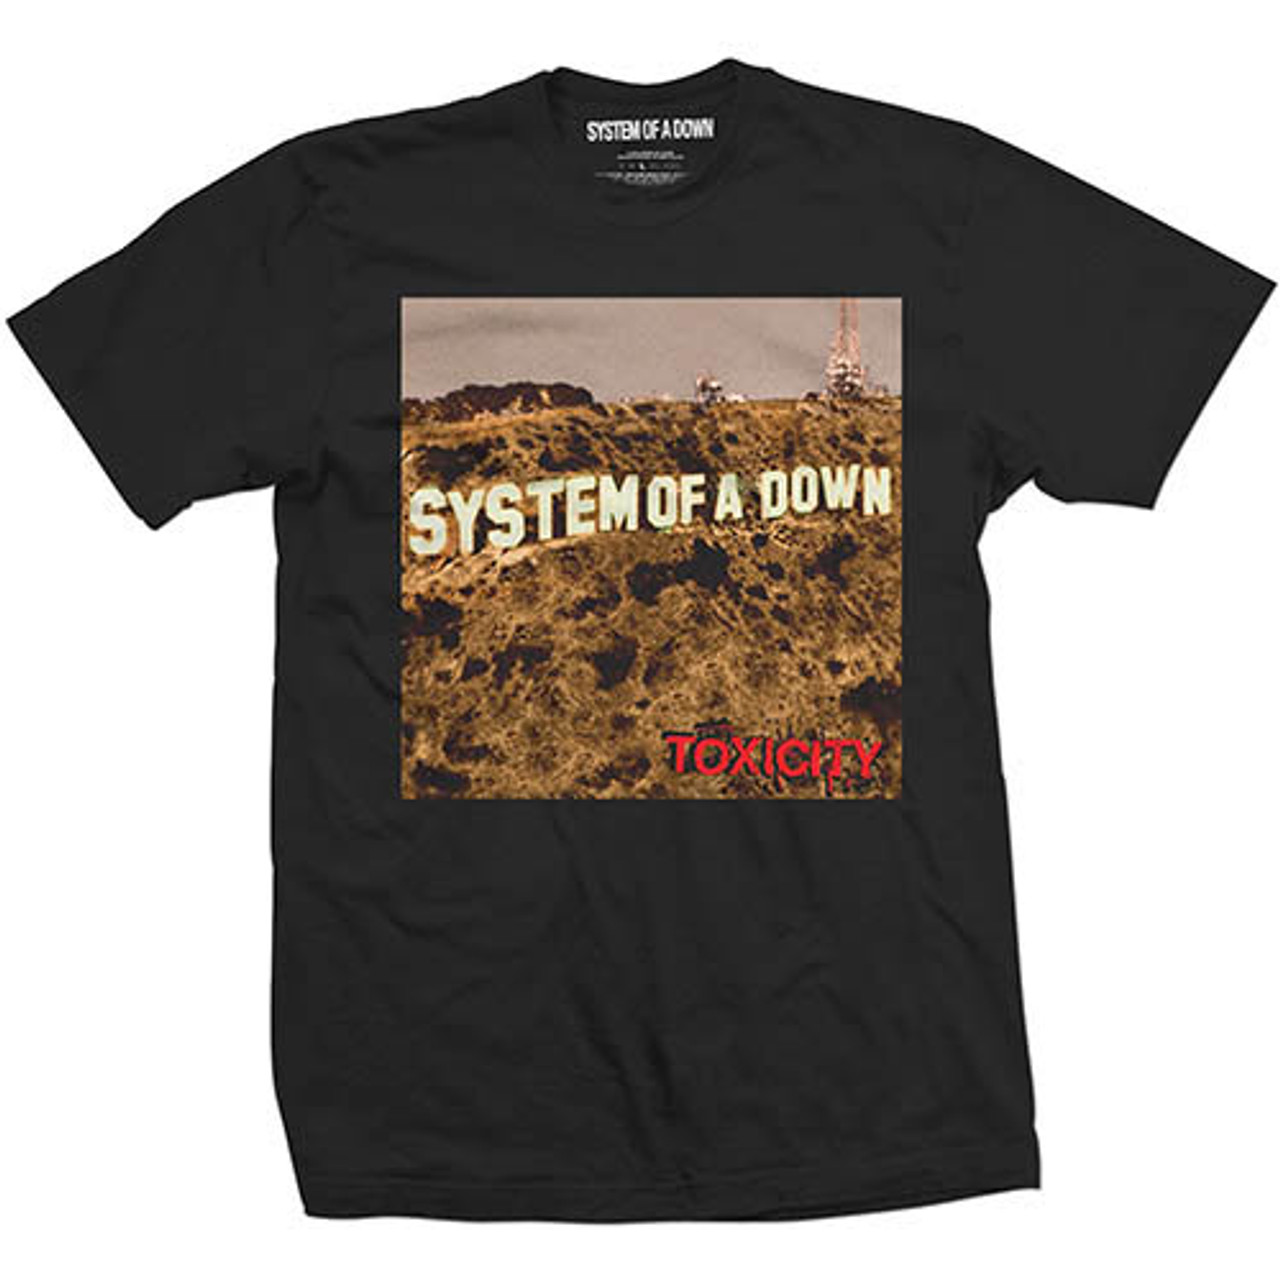 System Of A Down 'Toxicity' T-Shirt